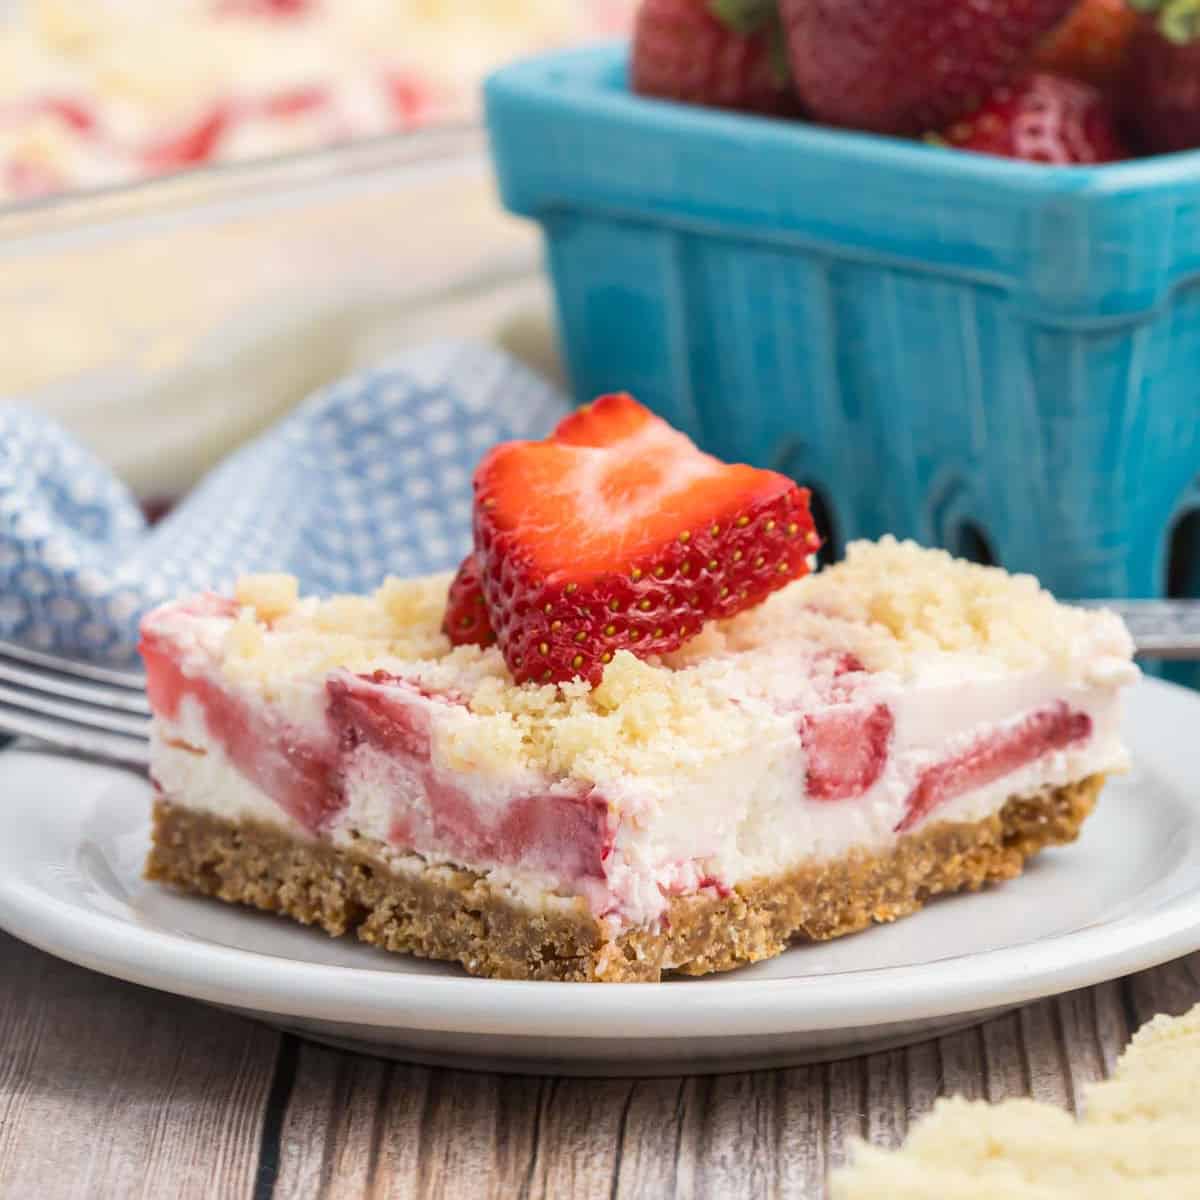 A slice of strawberry crunch bars sits on a white plate. The dessert consists of a crumbly base, creamy filling with strawberry chunks, and a crumb topping. A halved strawberry garnishes the top. A basket of fresh strawberries is visible in the background, enticing you to try this delicious recipe.